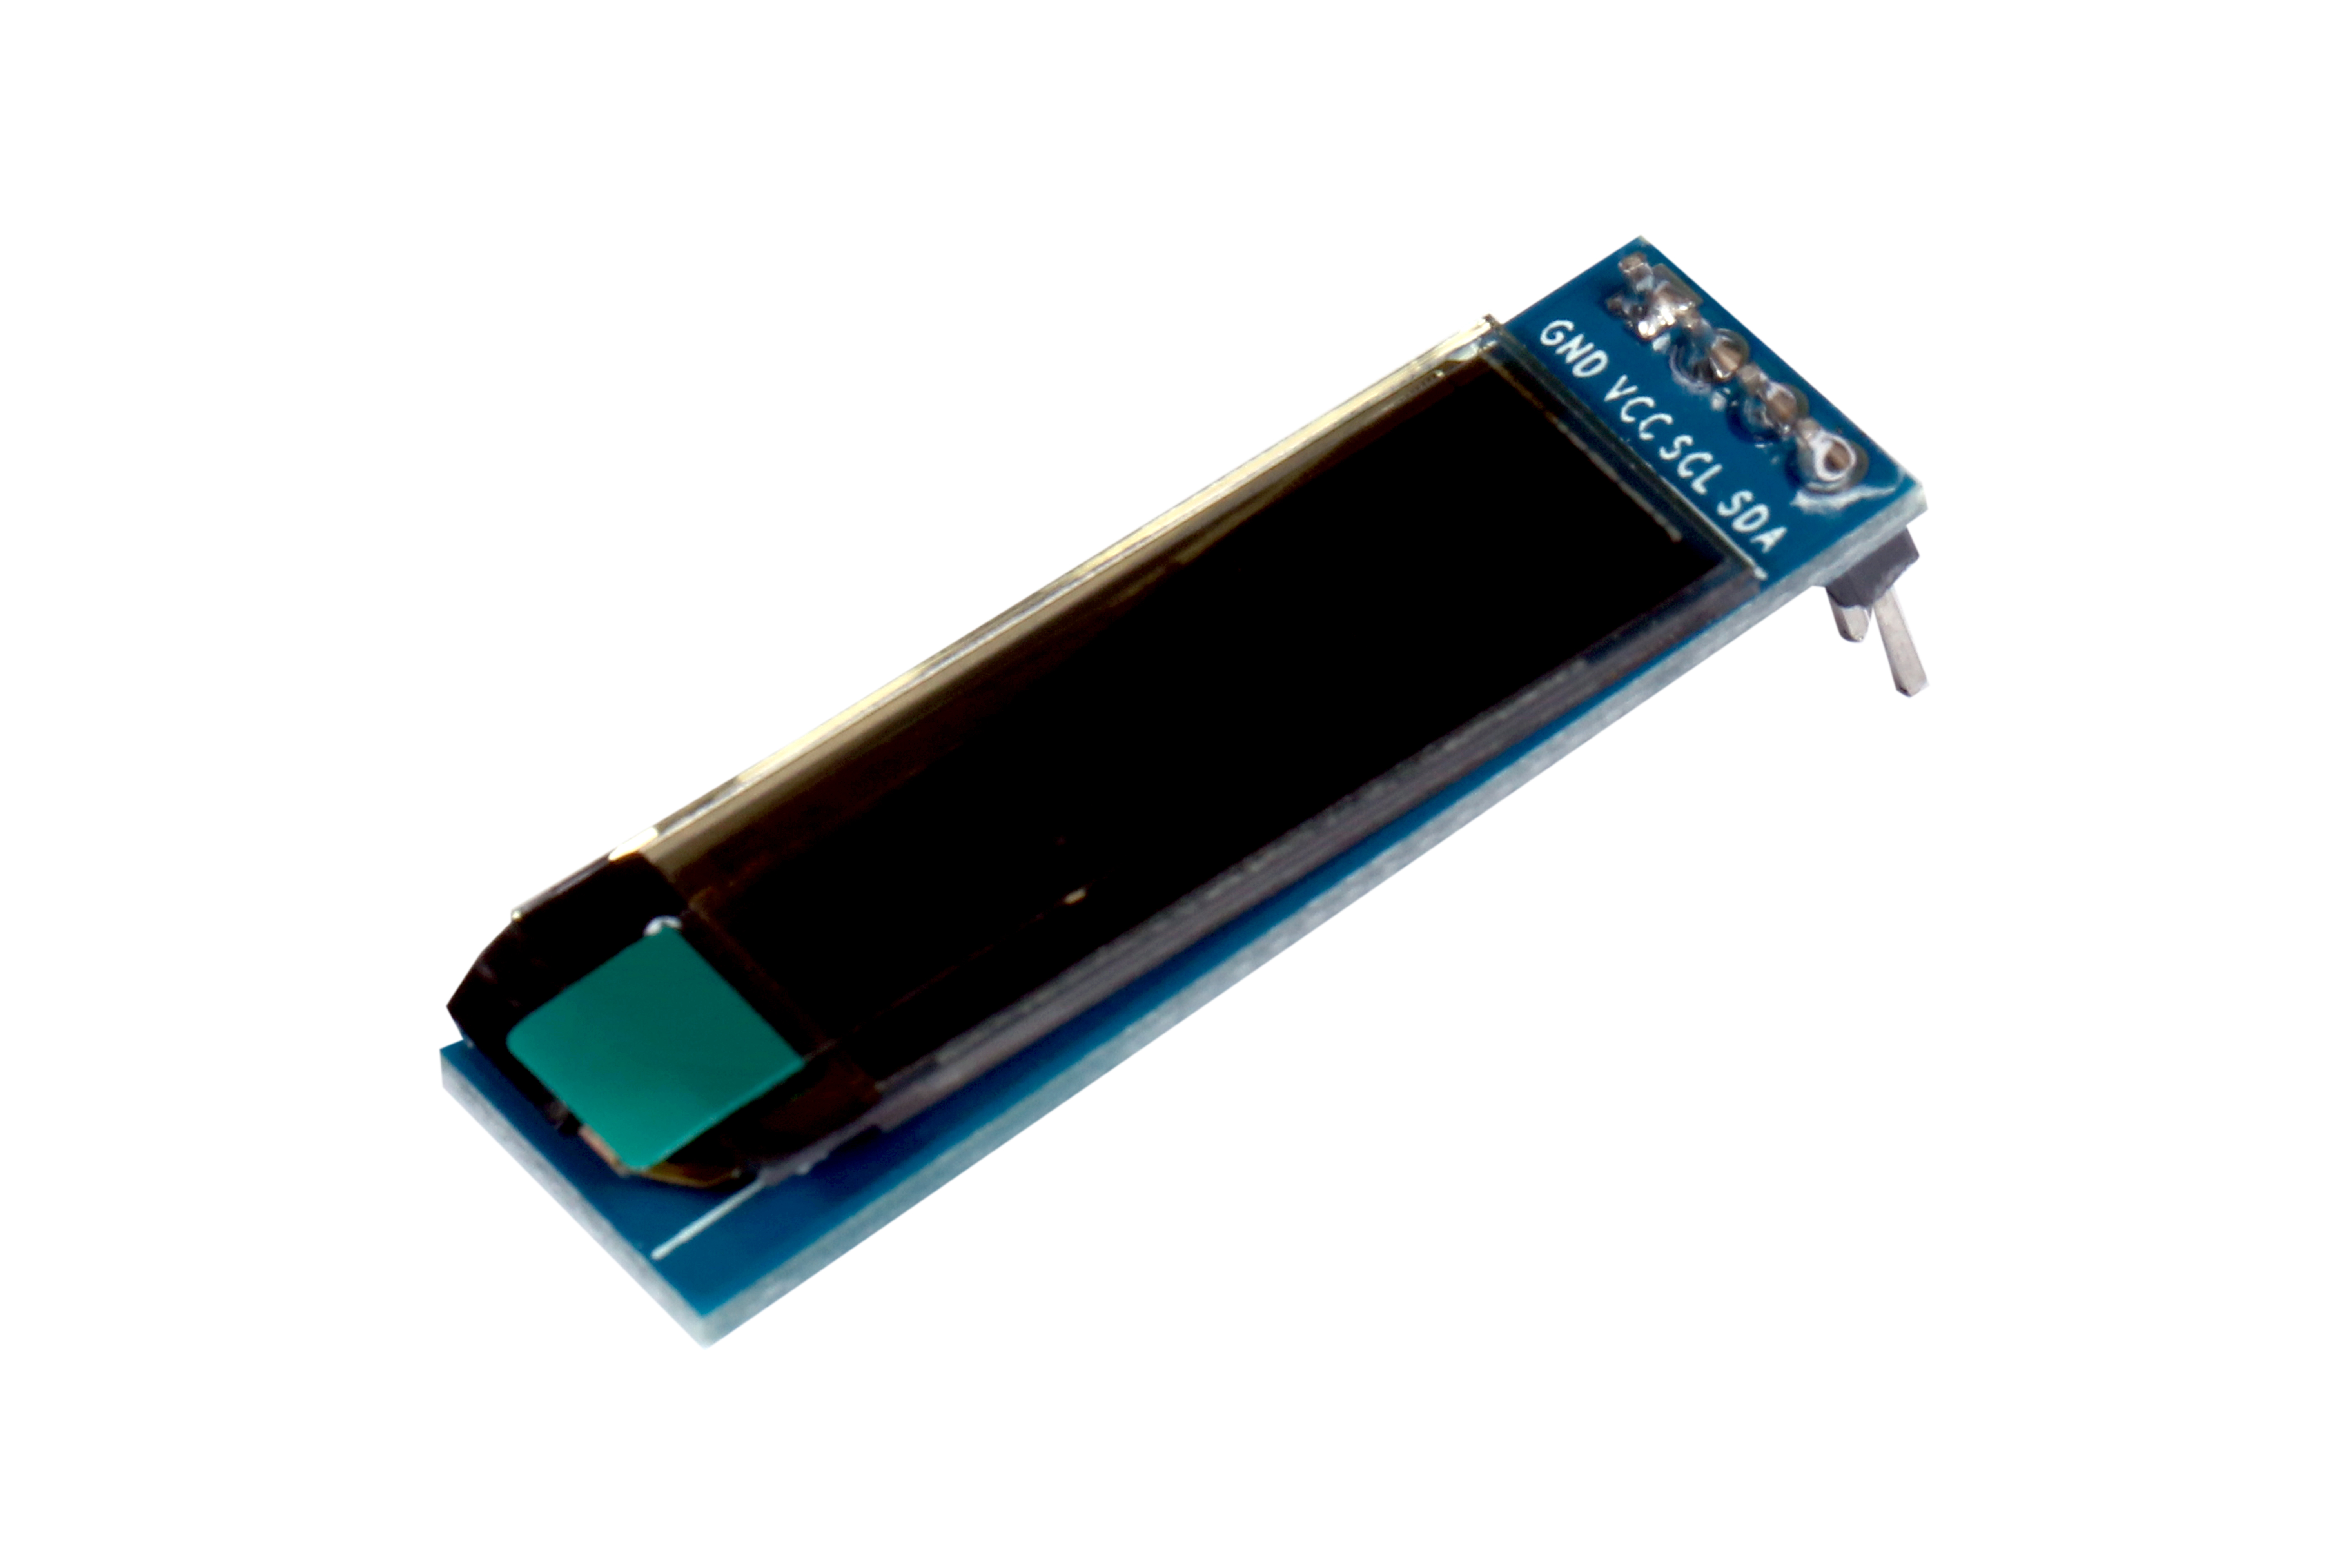 588_0.91inch OLED display 12832 LCD display device Blue color_1.JPG